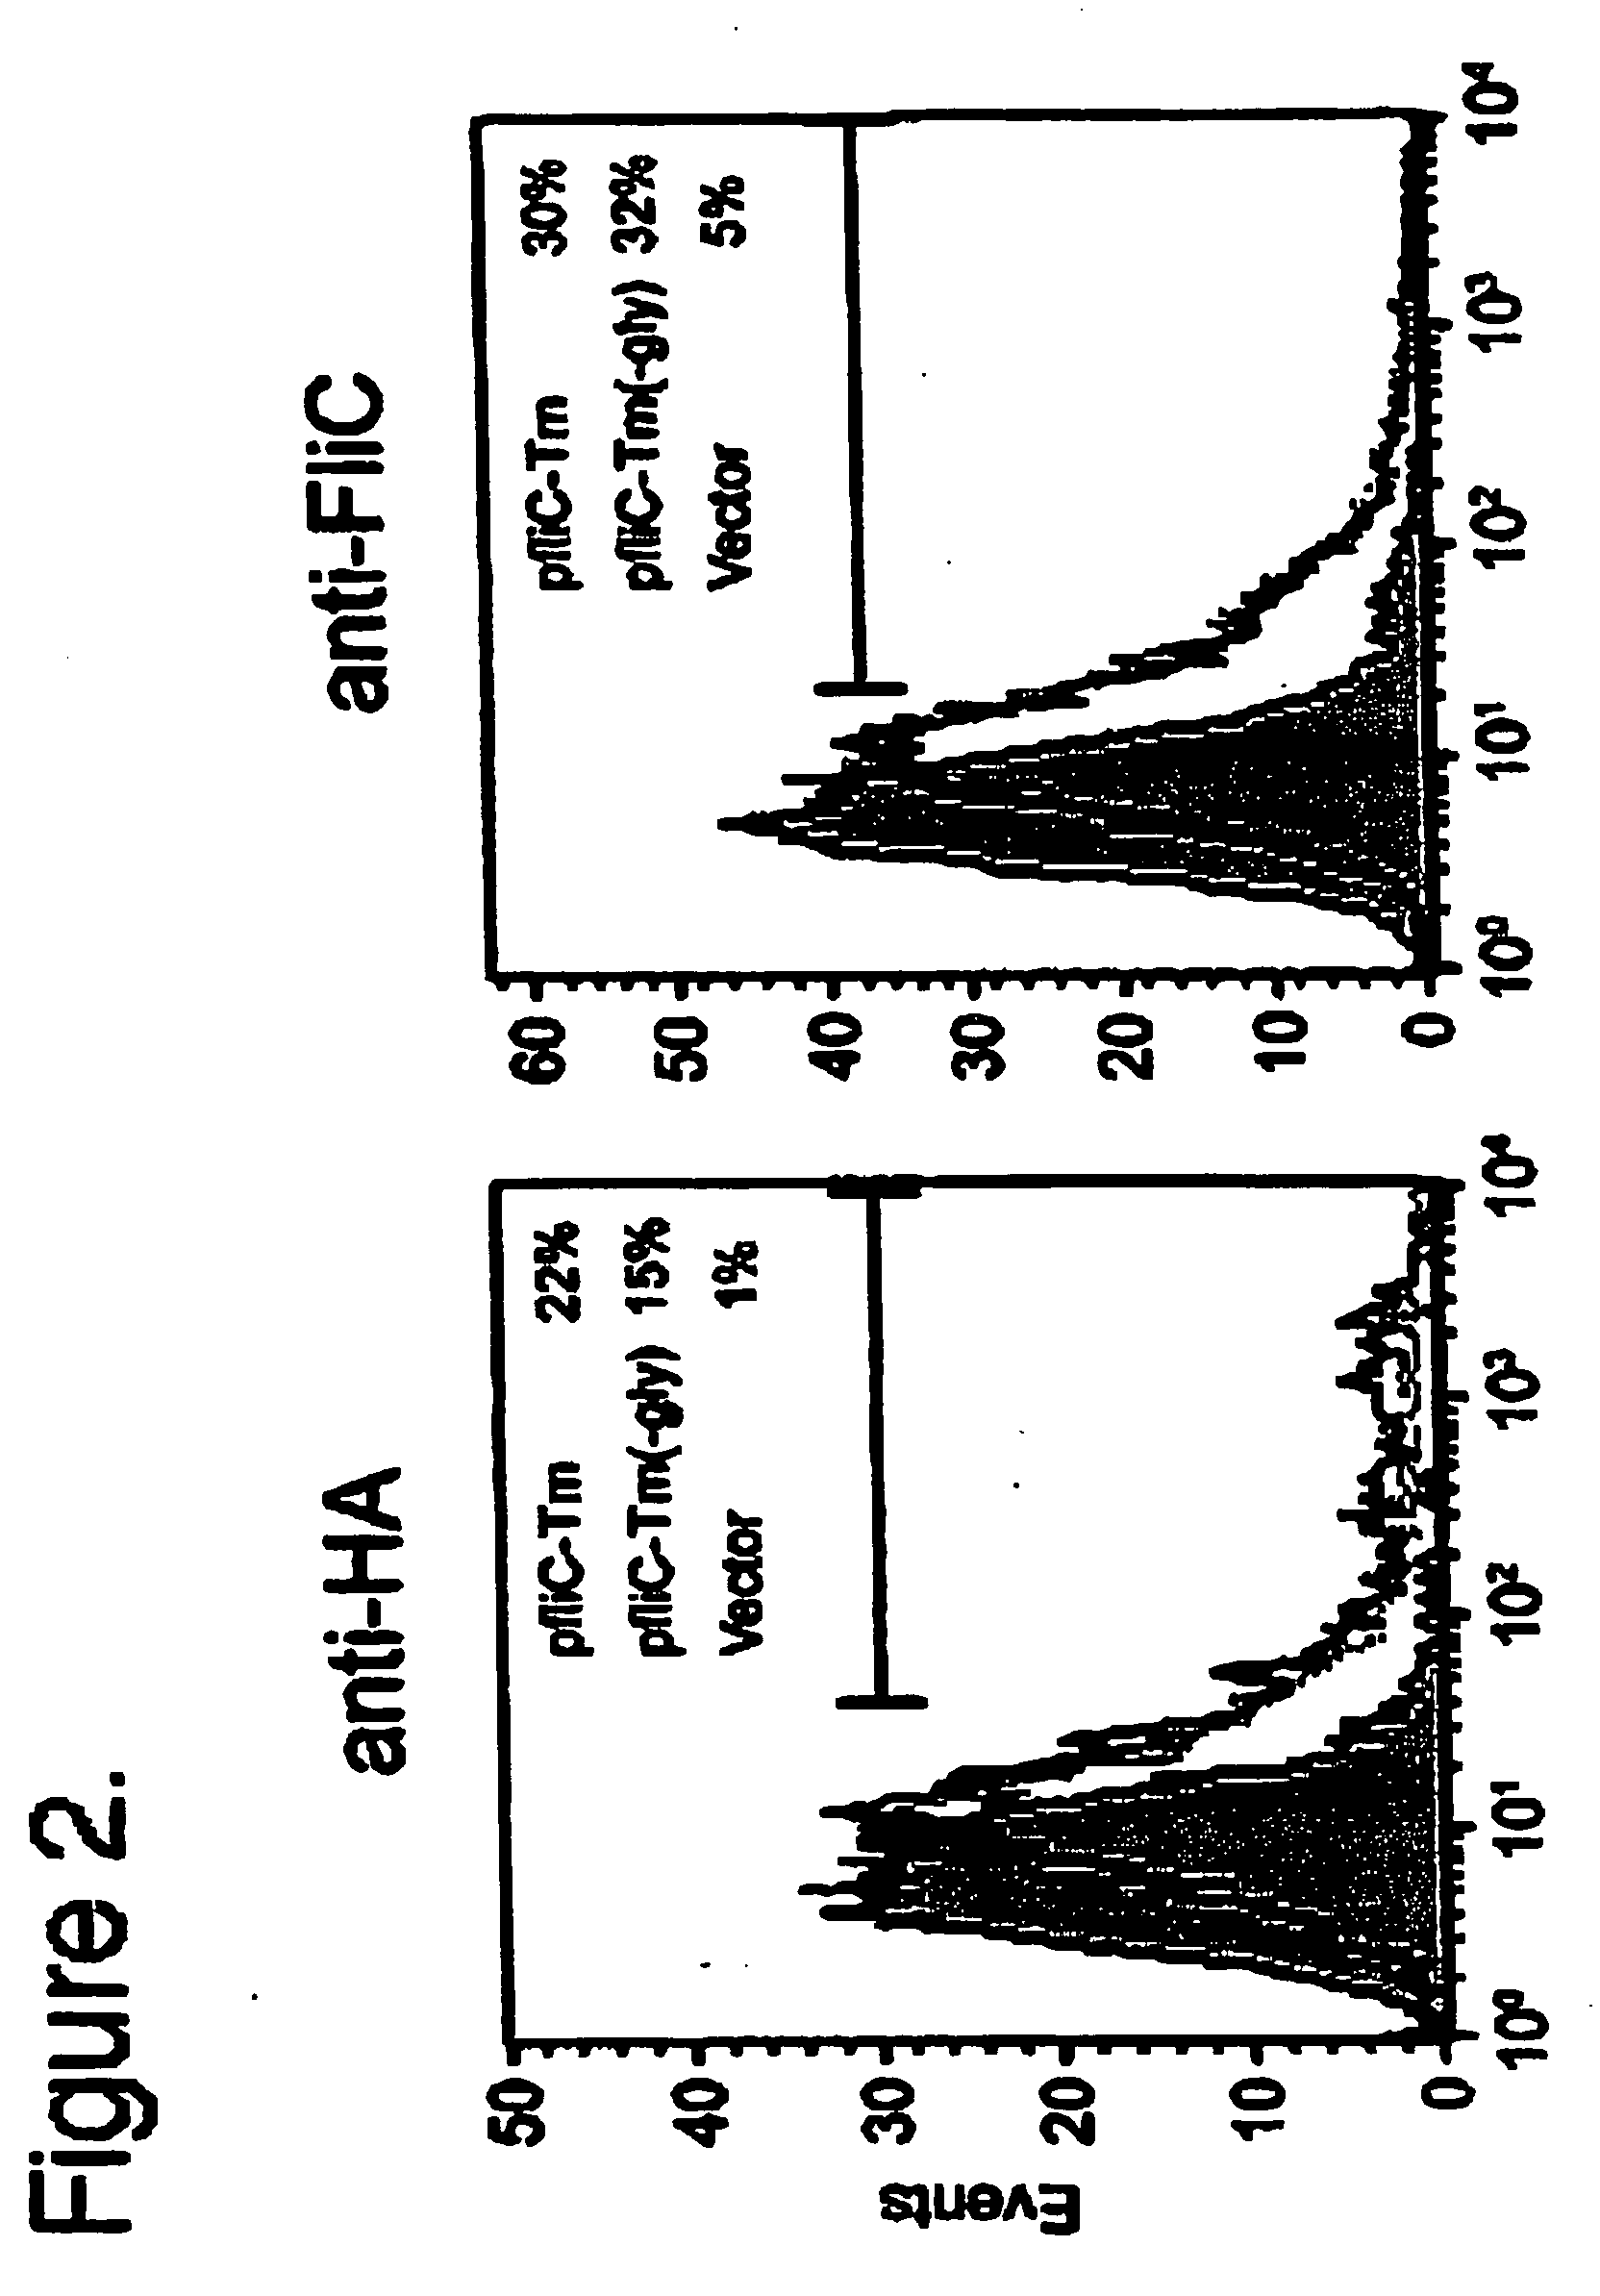 Use of Flagellin as an Adjuvant for Vaccine